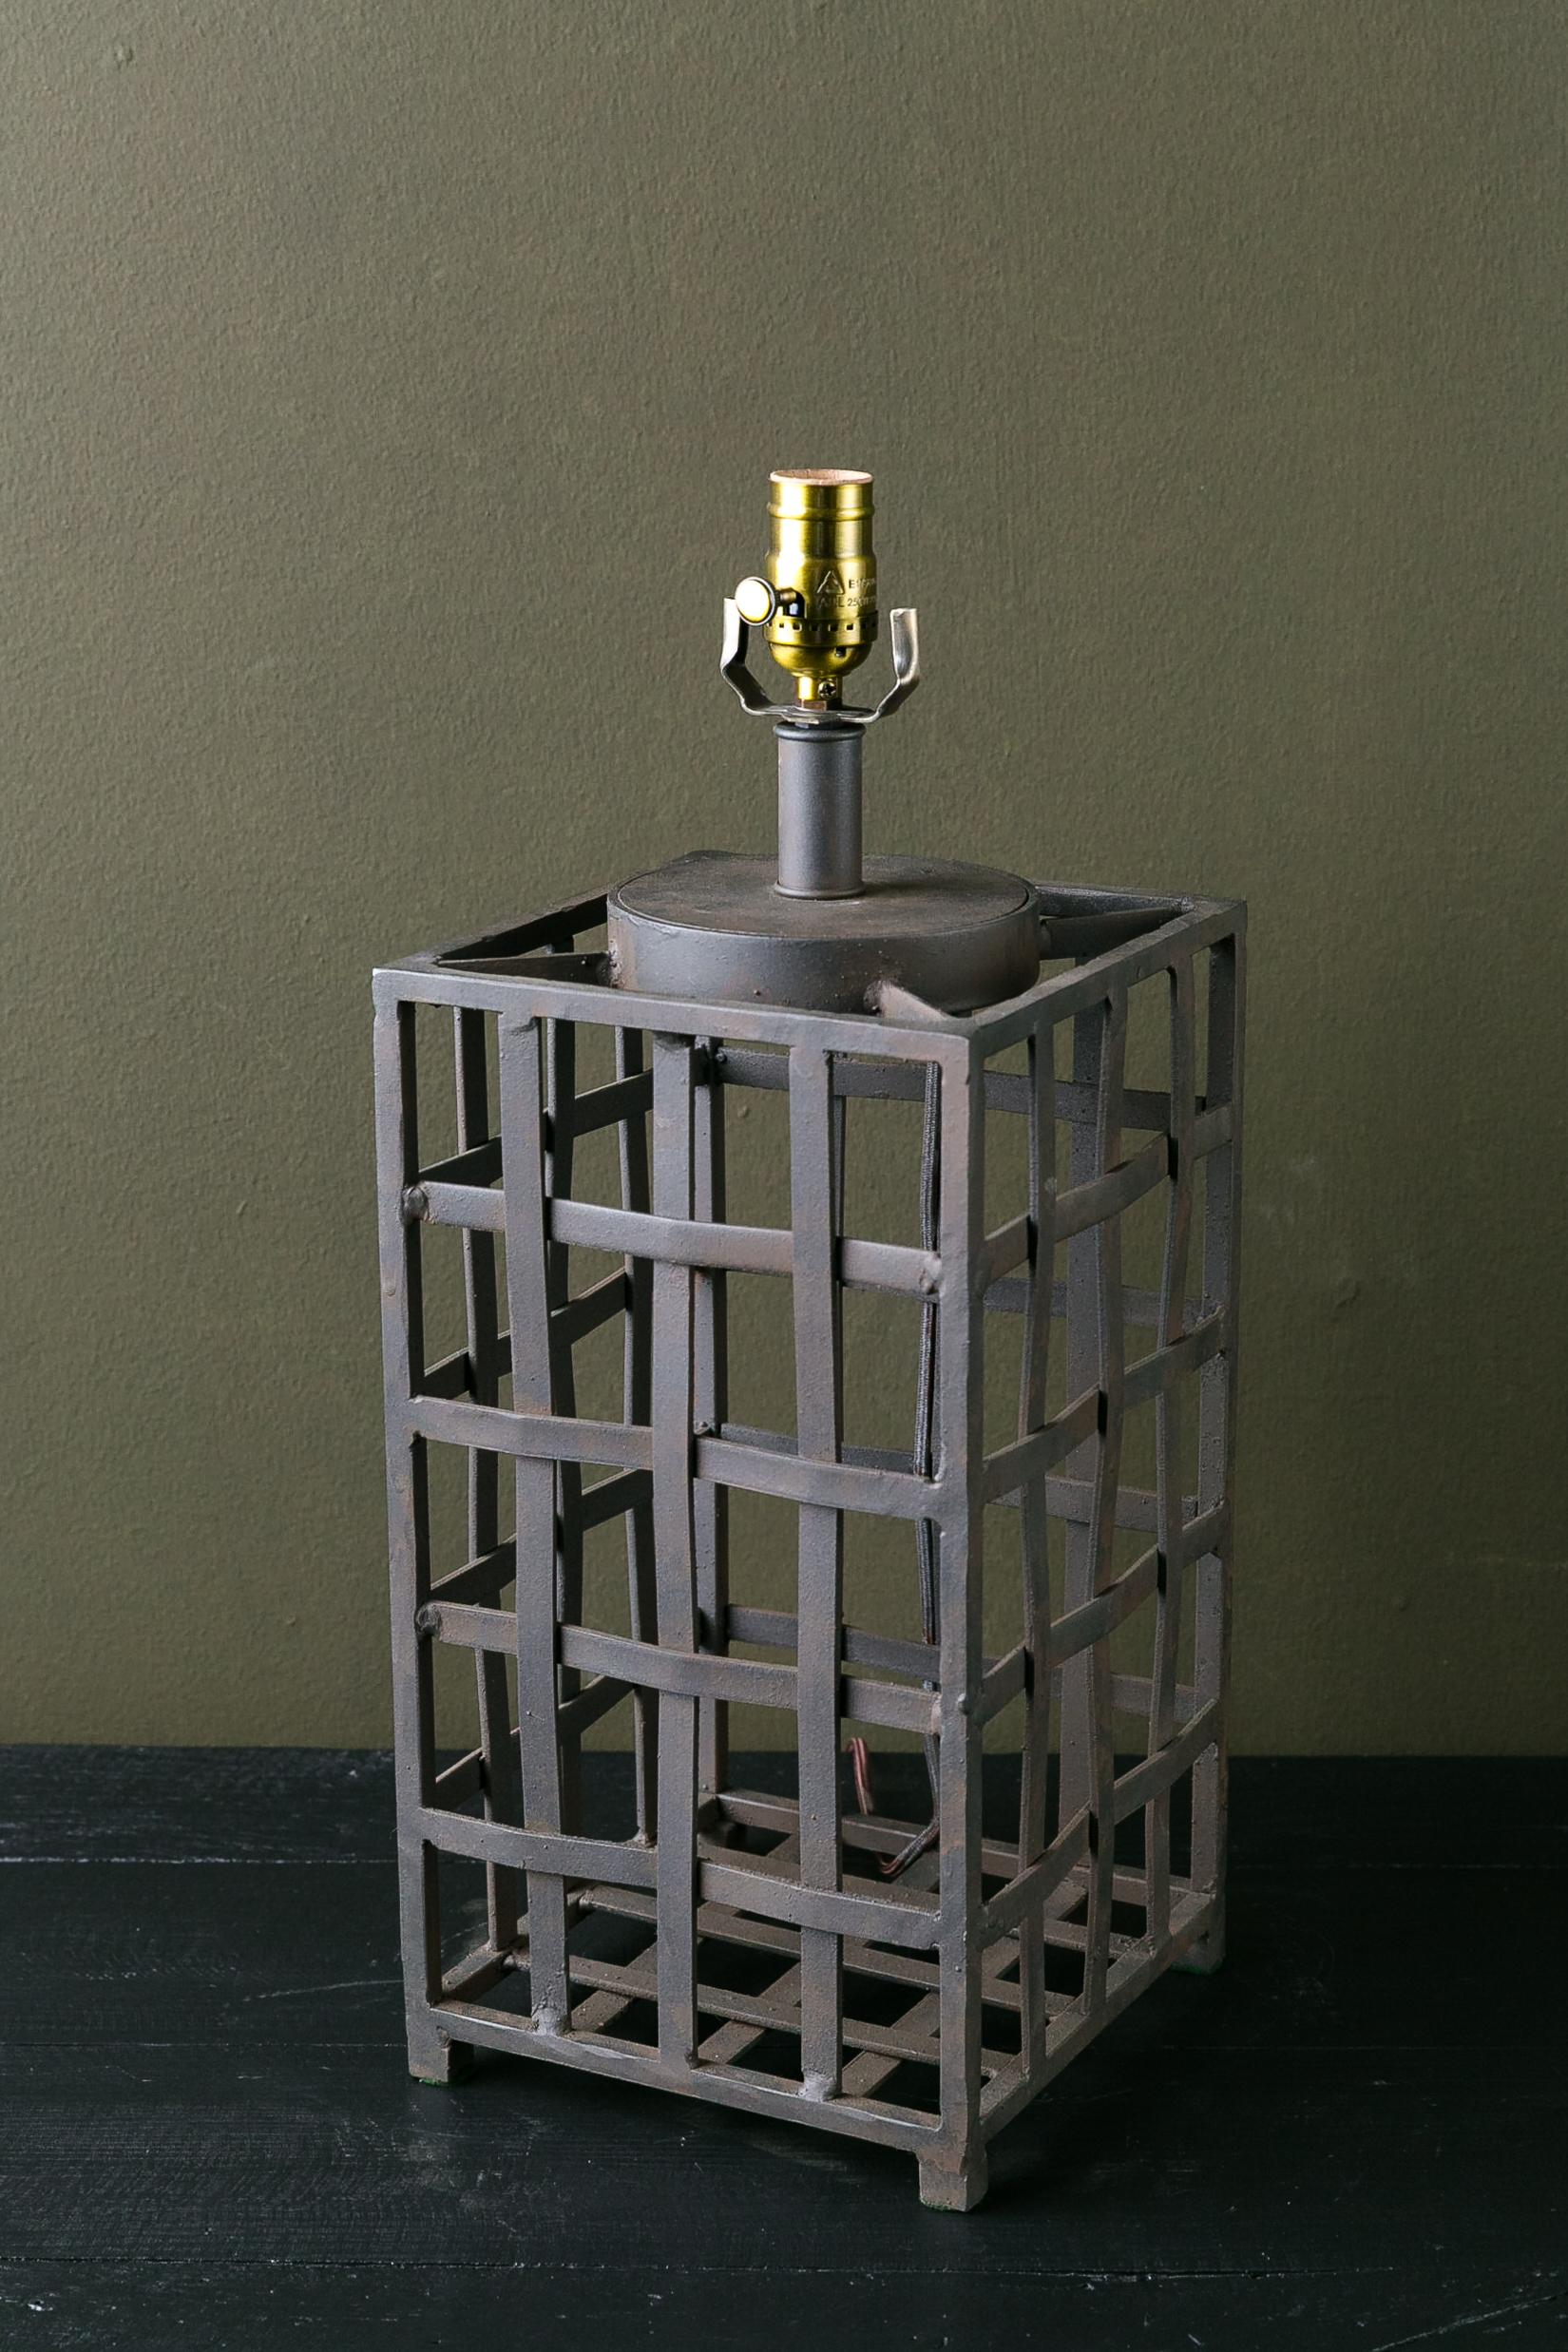 Our own design. Hand forged woven iron table lamp. Manufactured in the USA and wired in USA with UL-approved parts. Nice adaptable style that would look good in rooms both classic and contemporary.